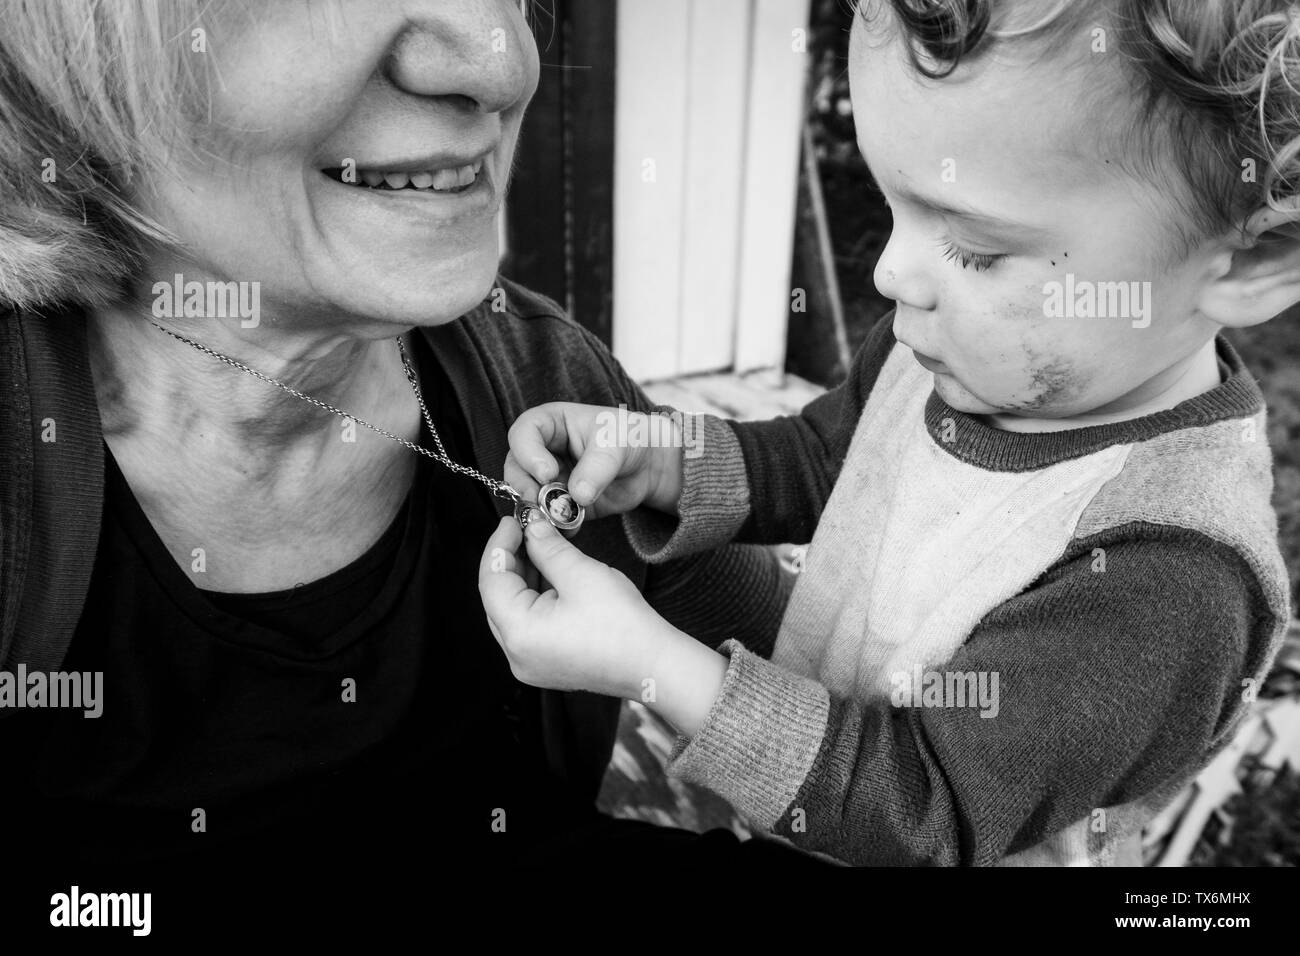 Black and white image of a toddler boy looking at the photo in an open locket hanging around an adult smiling woman's neck. Stock Photo